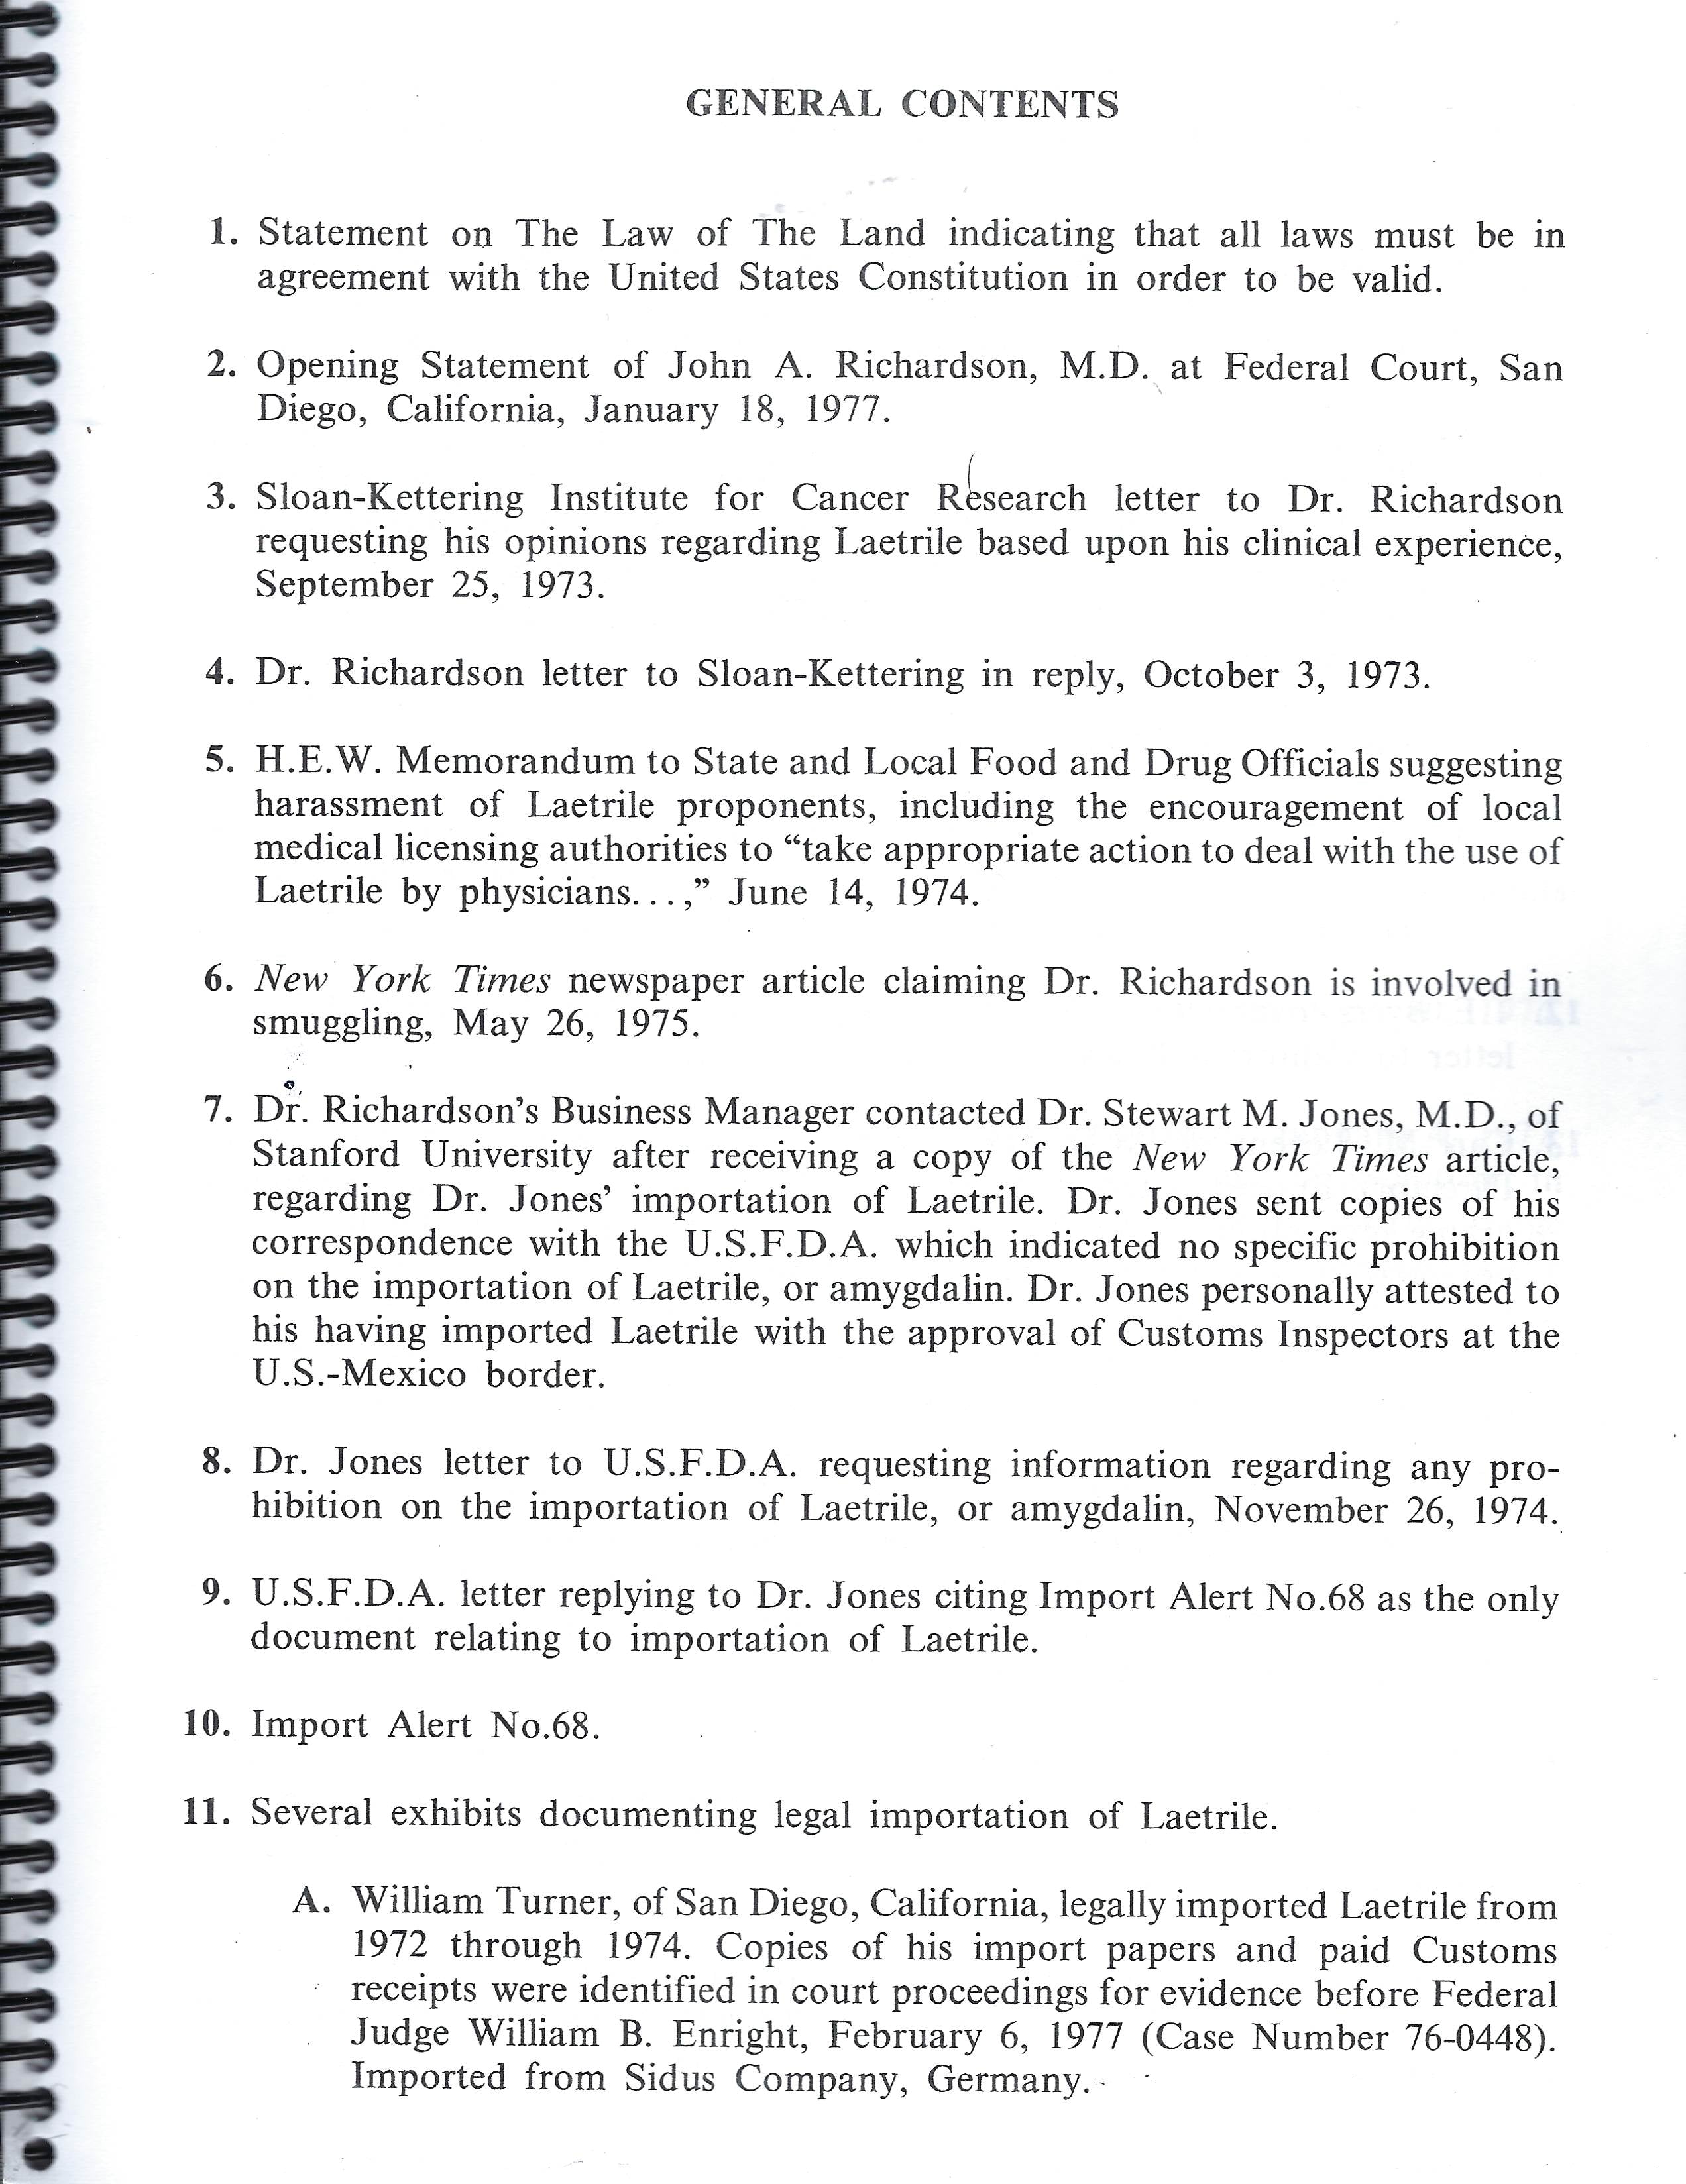 (Book) Exhibits and Letters of Support for John A. Richardson, MD Received in Last Sixty Days-2-15-1977-v2 (248 pages)